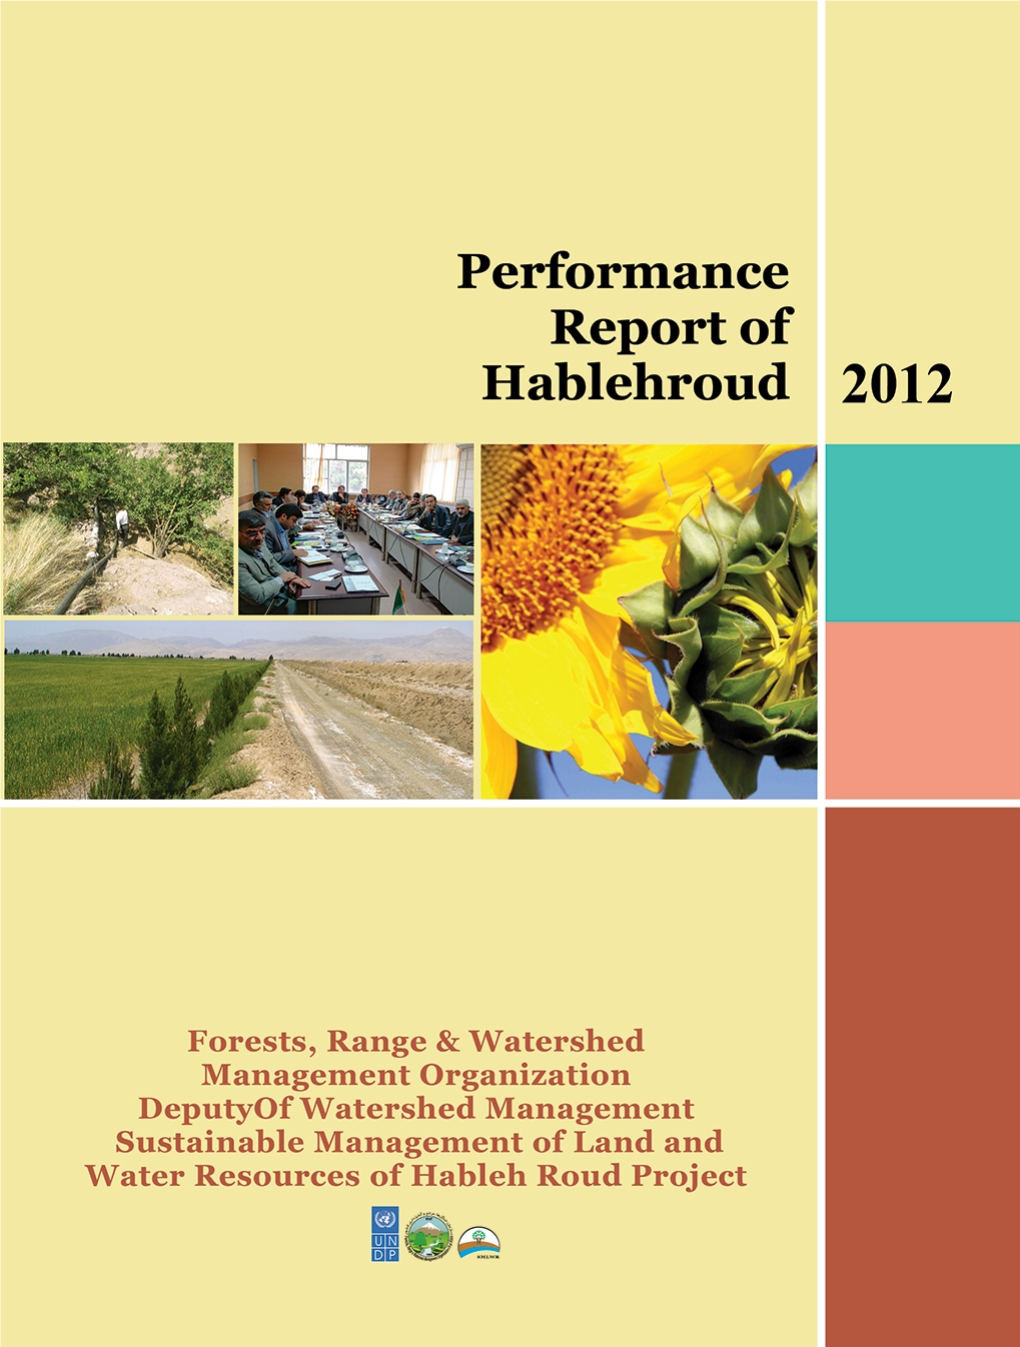 Performance Report of Hablehroud Project- 2012